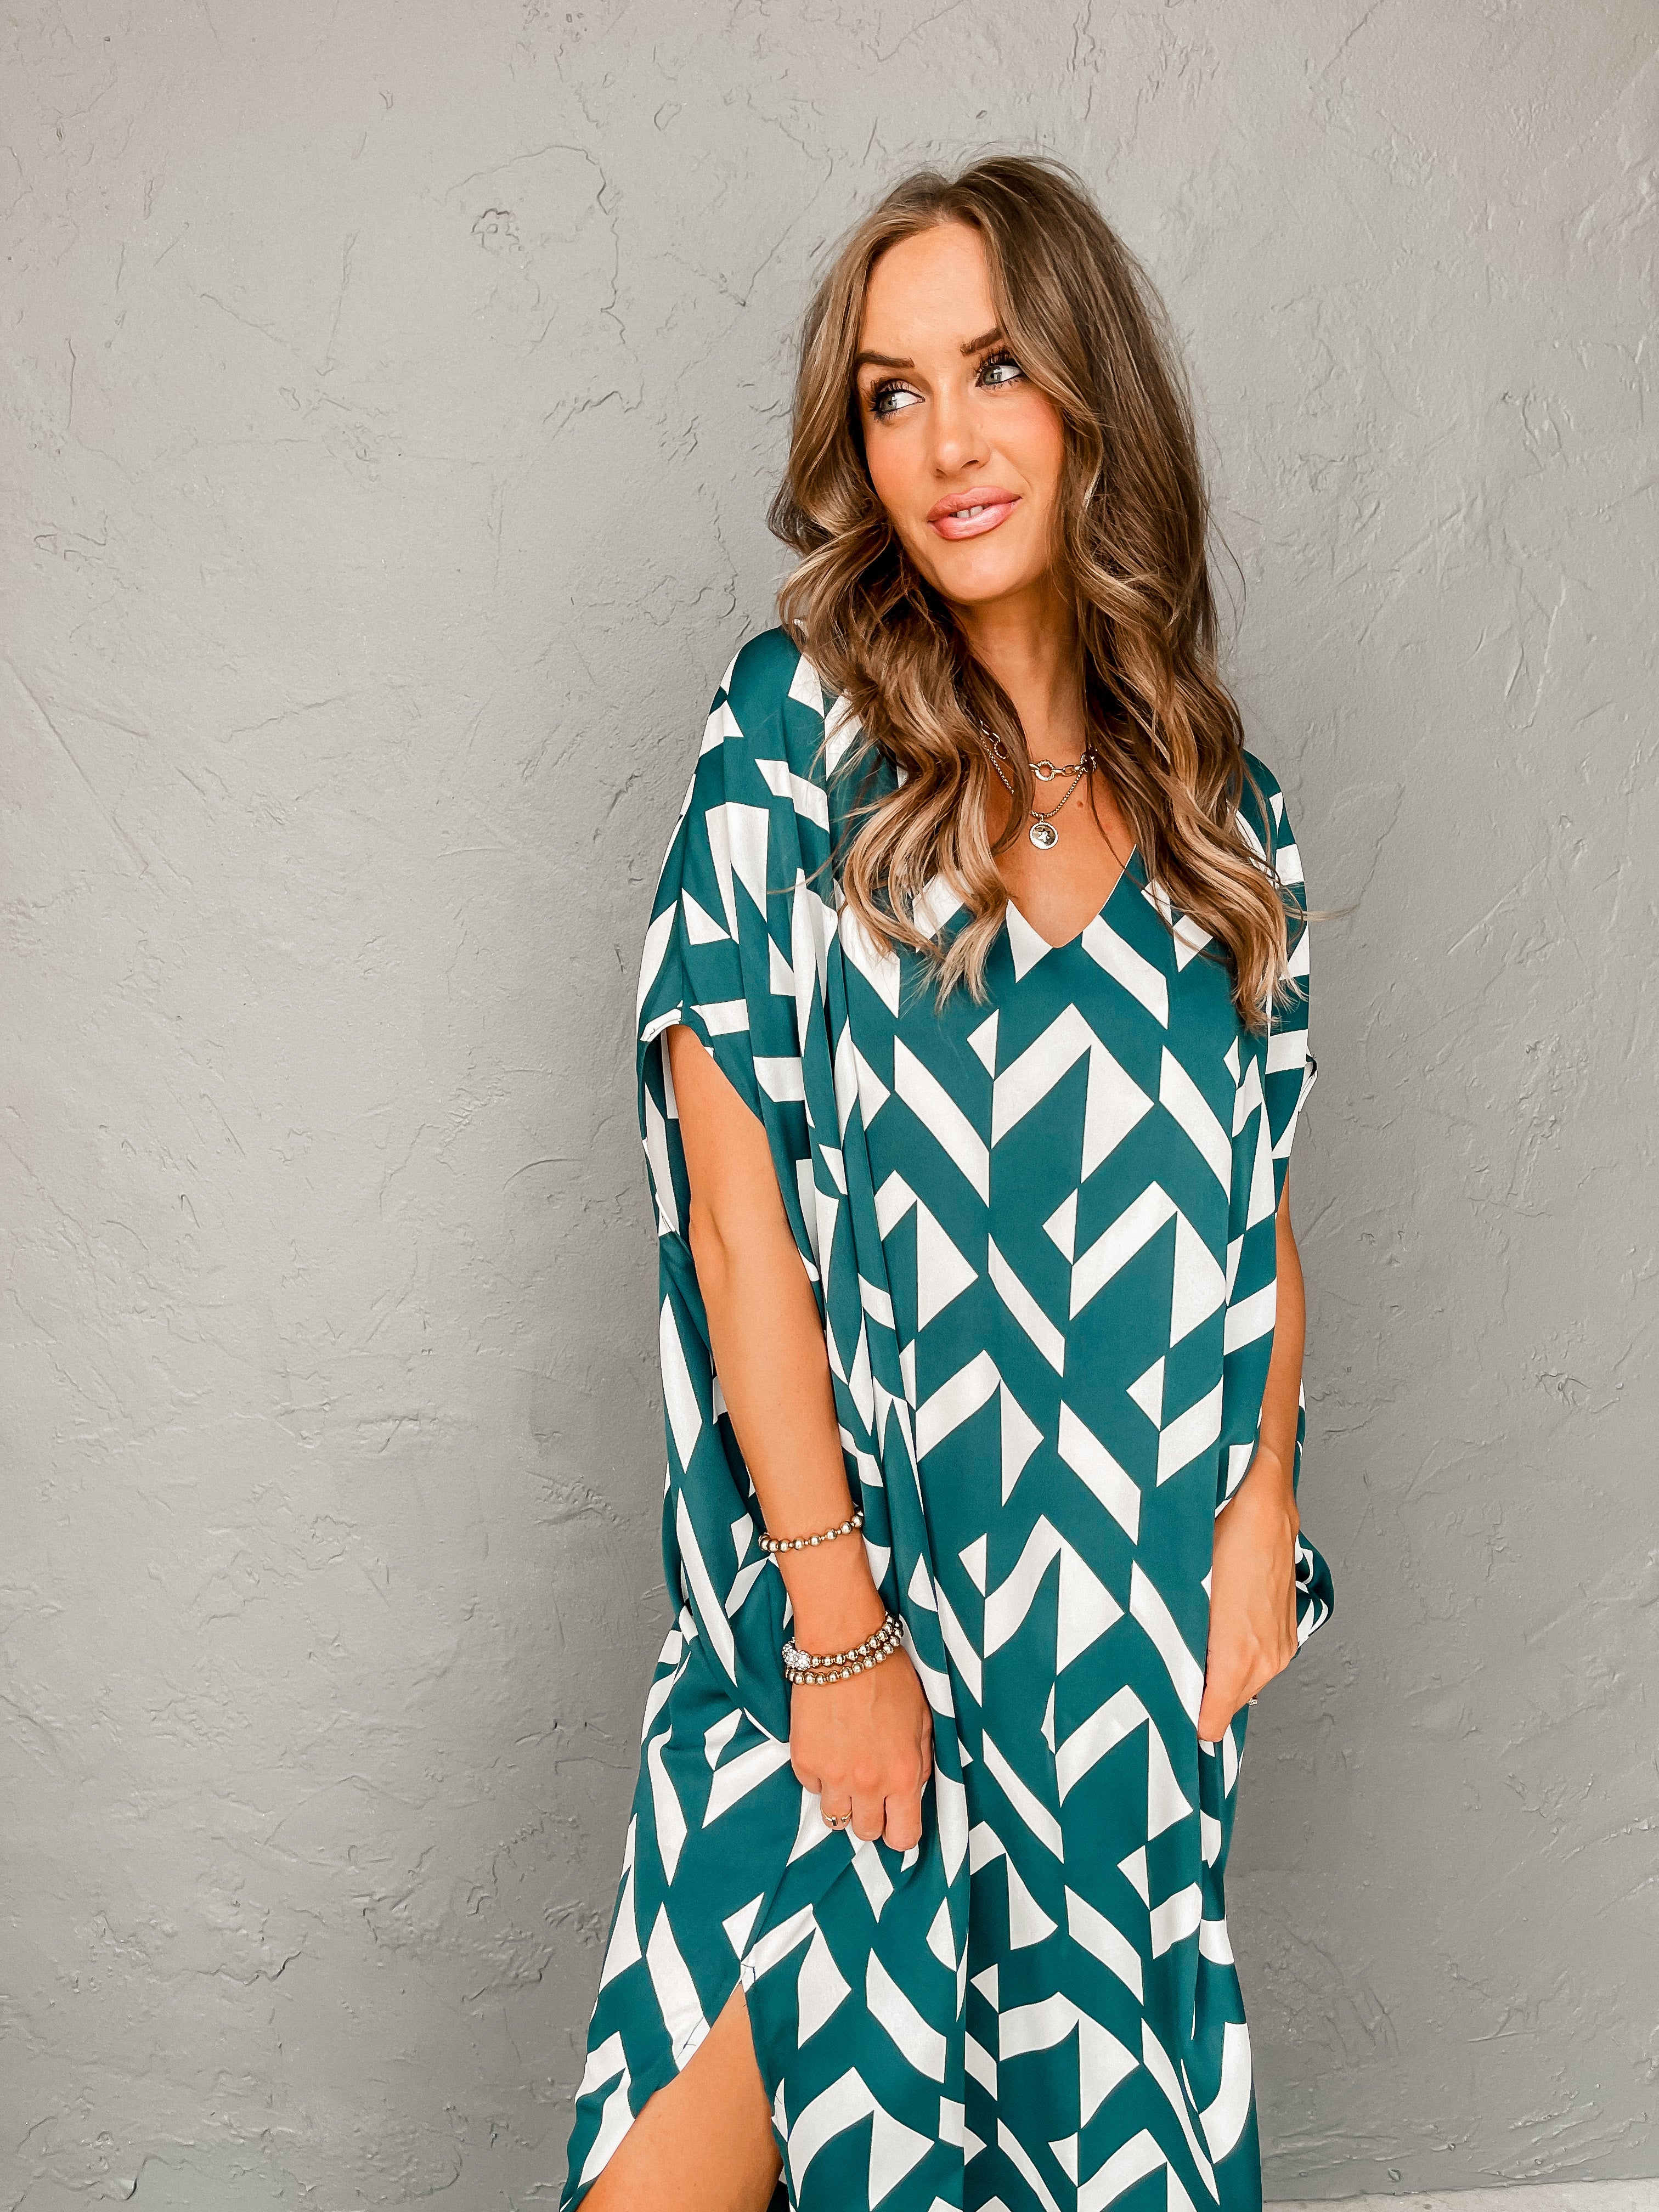 Go With The Flow Caftan Maxi Dress-Hunter Green